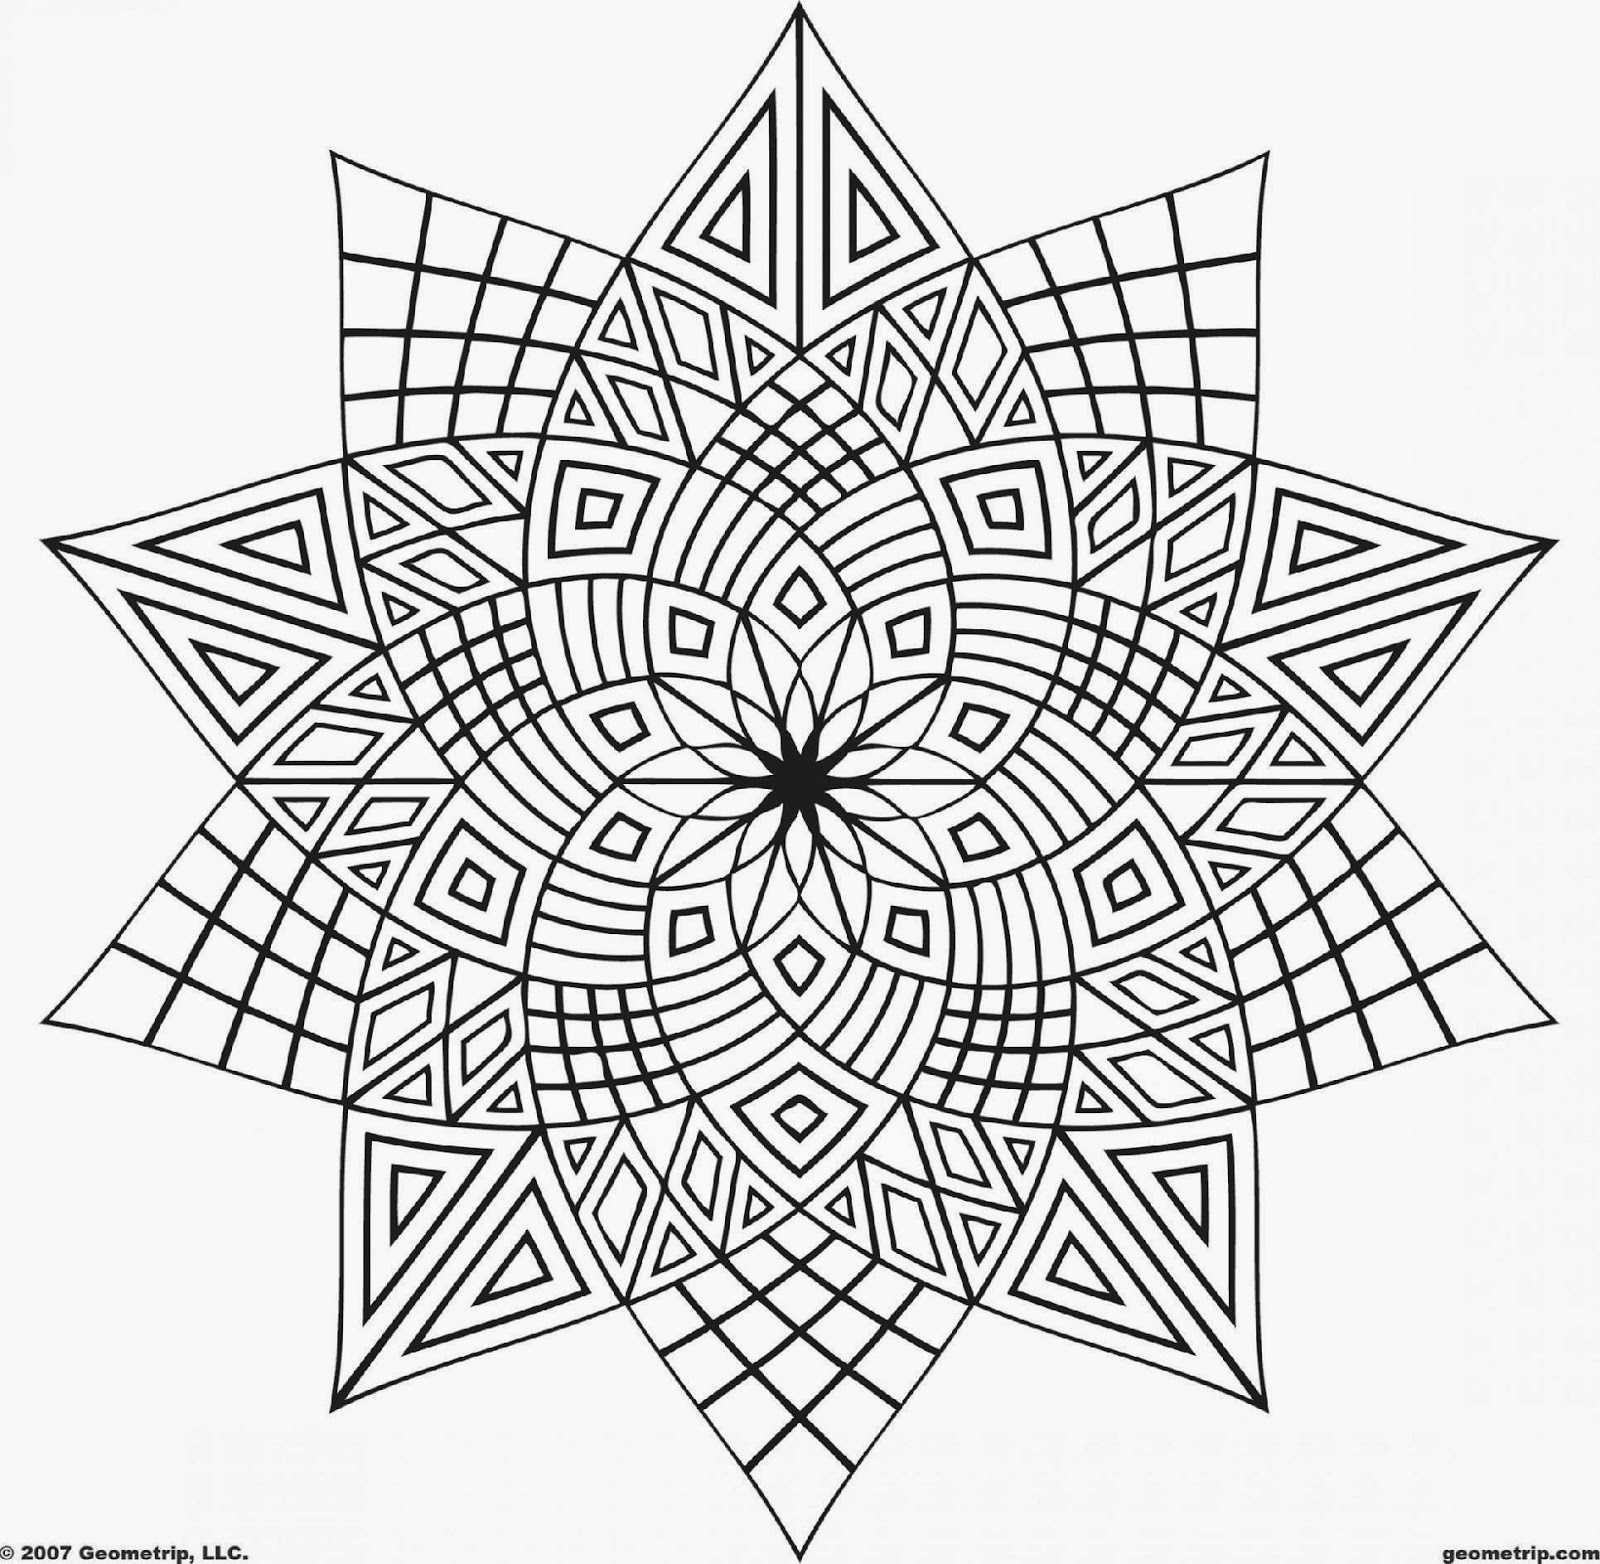 Awesome Coloring Pages Free Coloring Sheet Coloring Wallpapers Download Free Images Wallpaper [coloring654.blogspot.com]